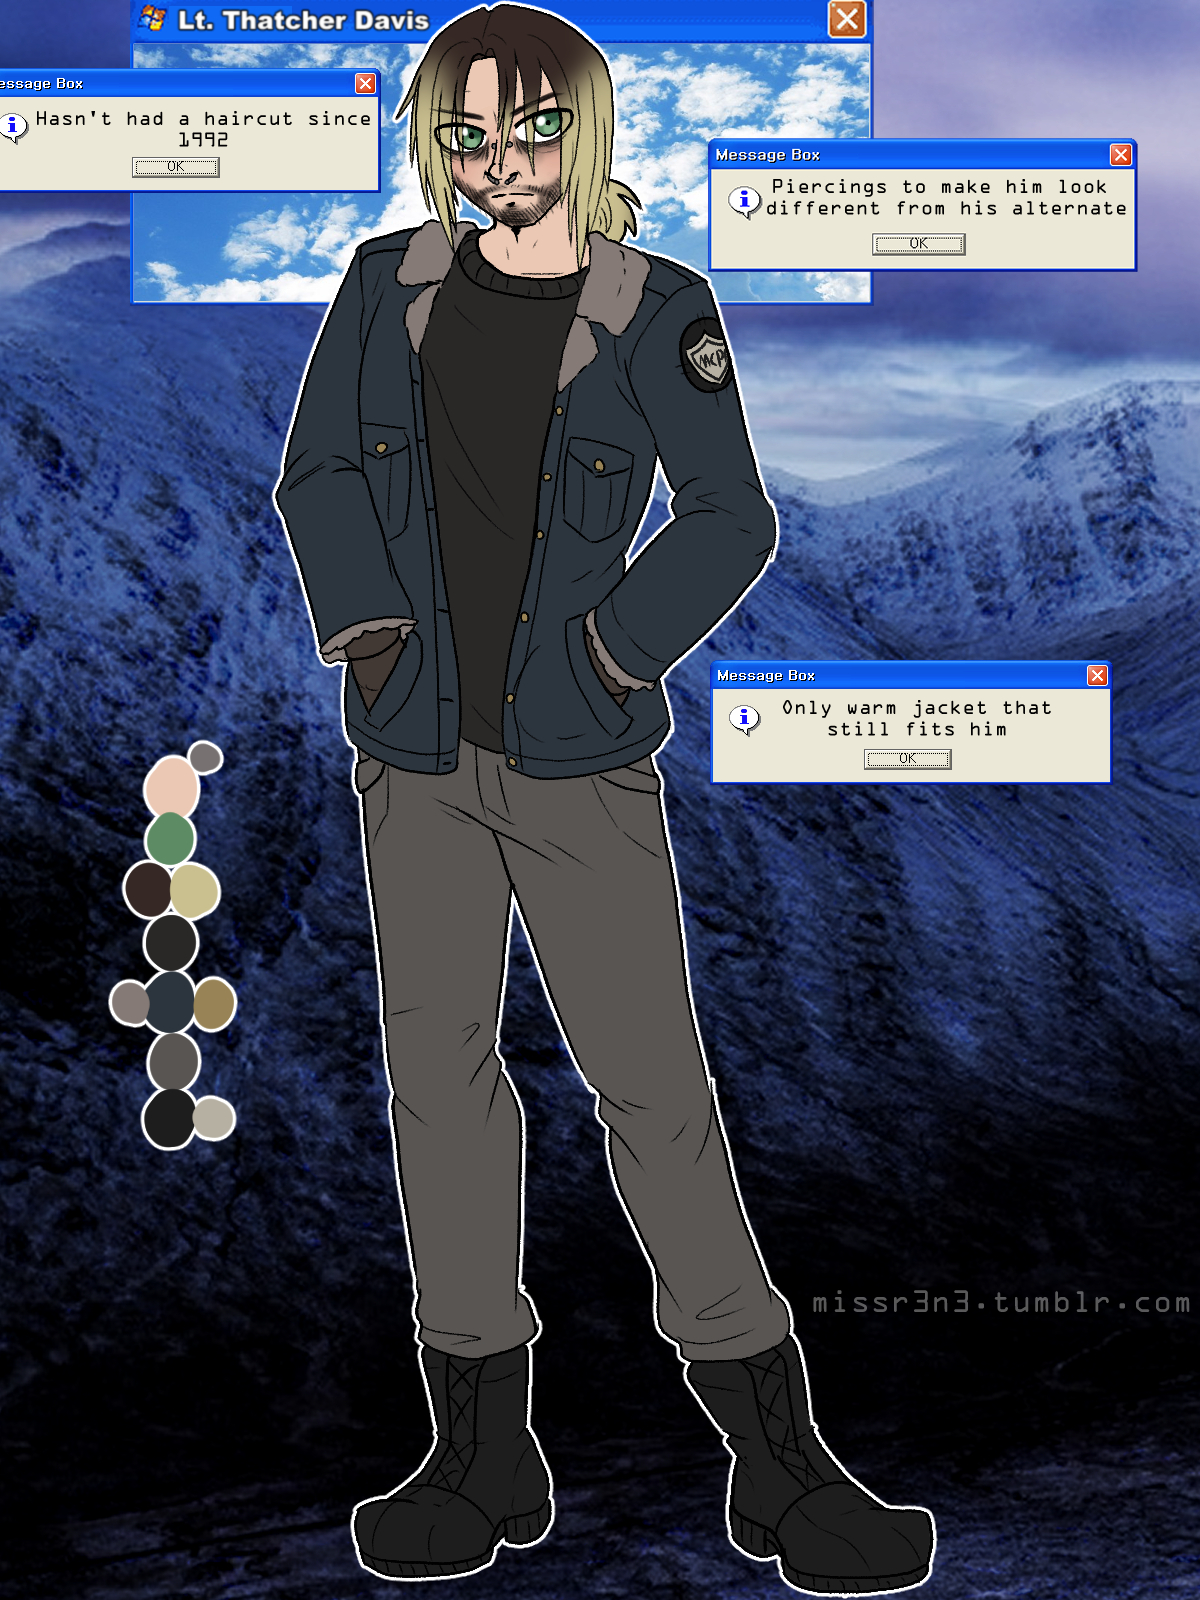 thatcher davis with long hair in a ponytail and a fleece police jacket in front of a glitching mountain landscape